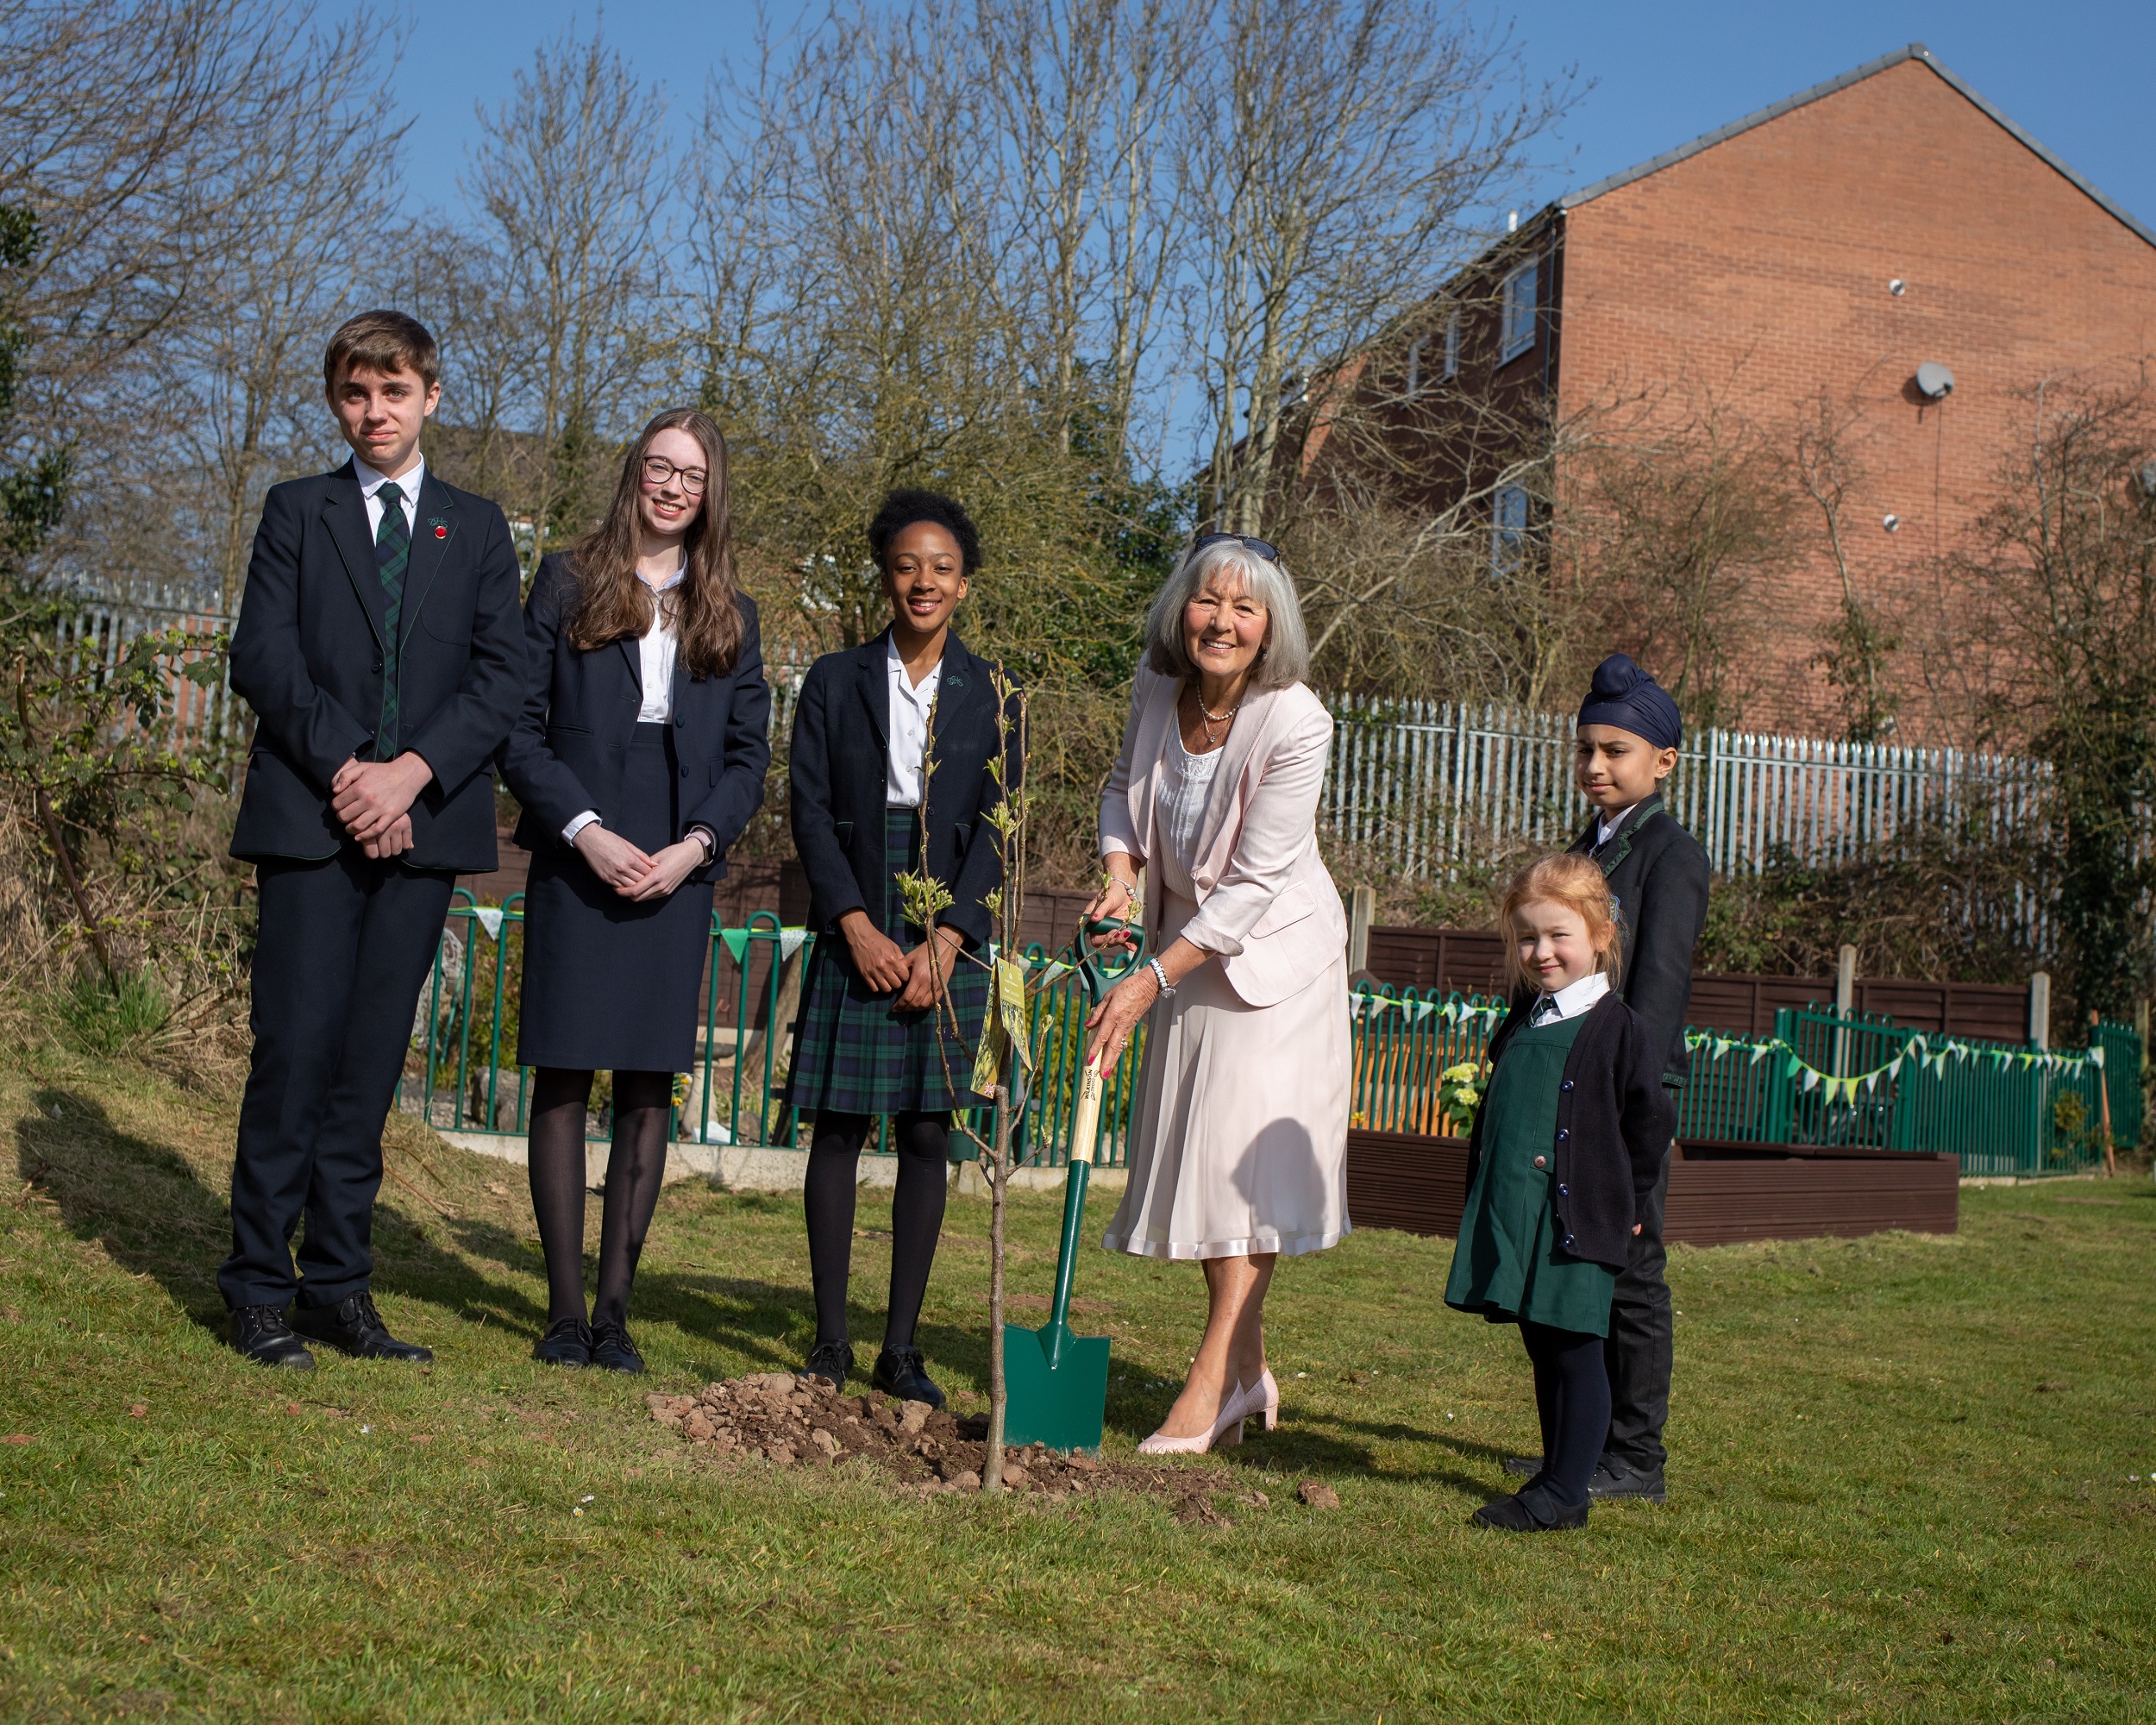 Pupils celebrate Jubilee with tree planting